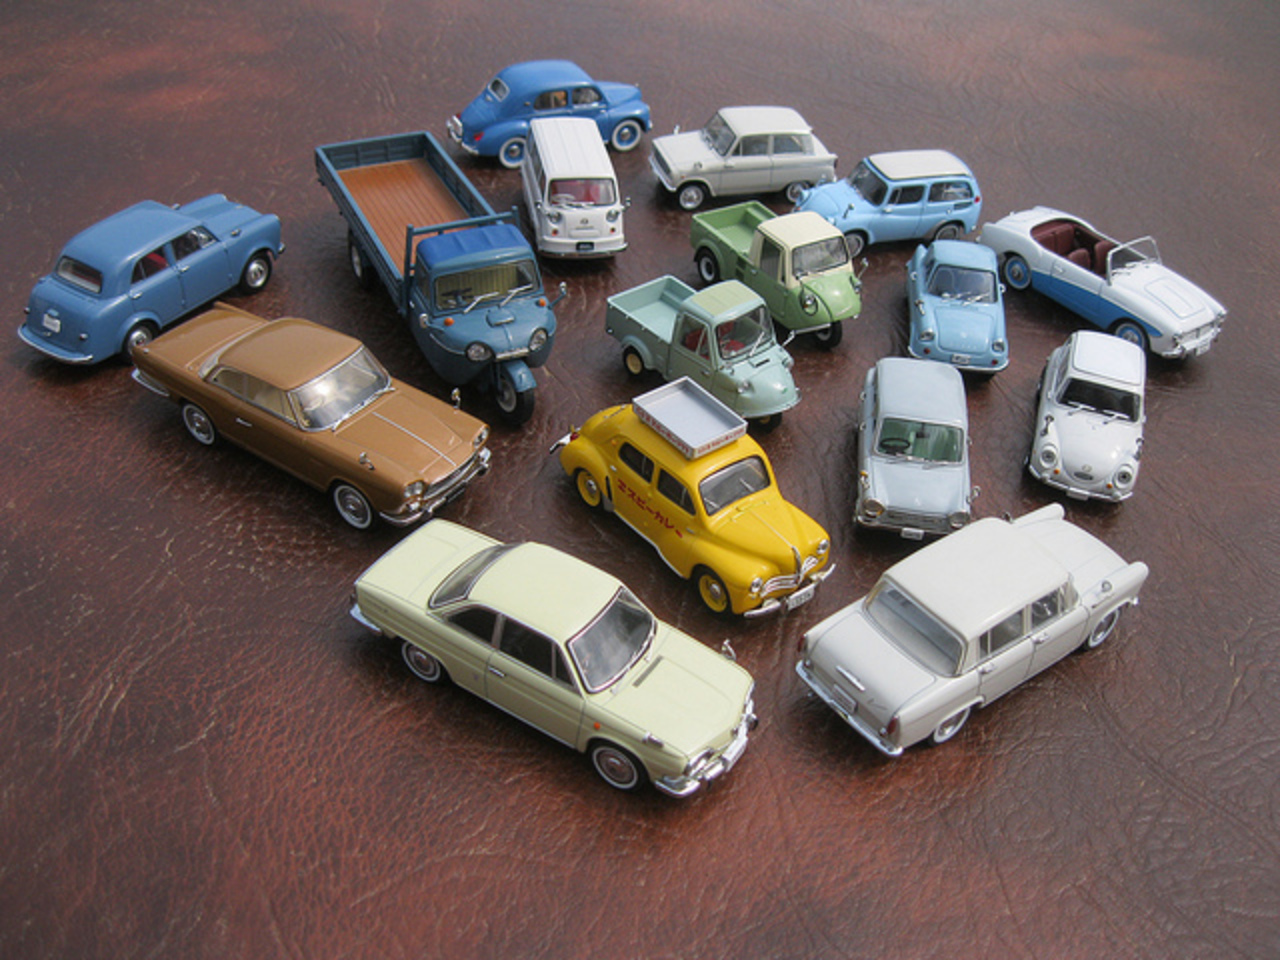 Clockwise from top centre: Hino PA62 (Japanese-built Renault 4CV derivative,